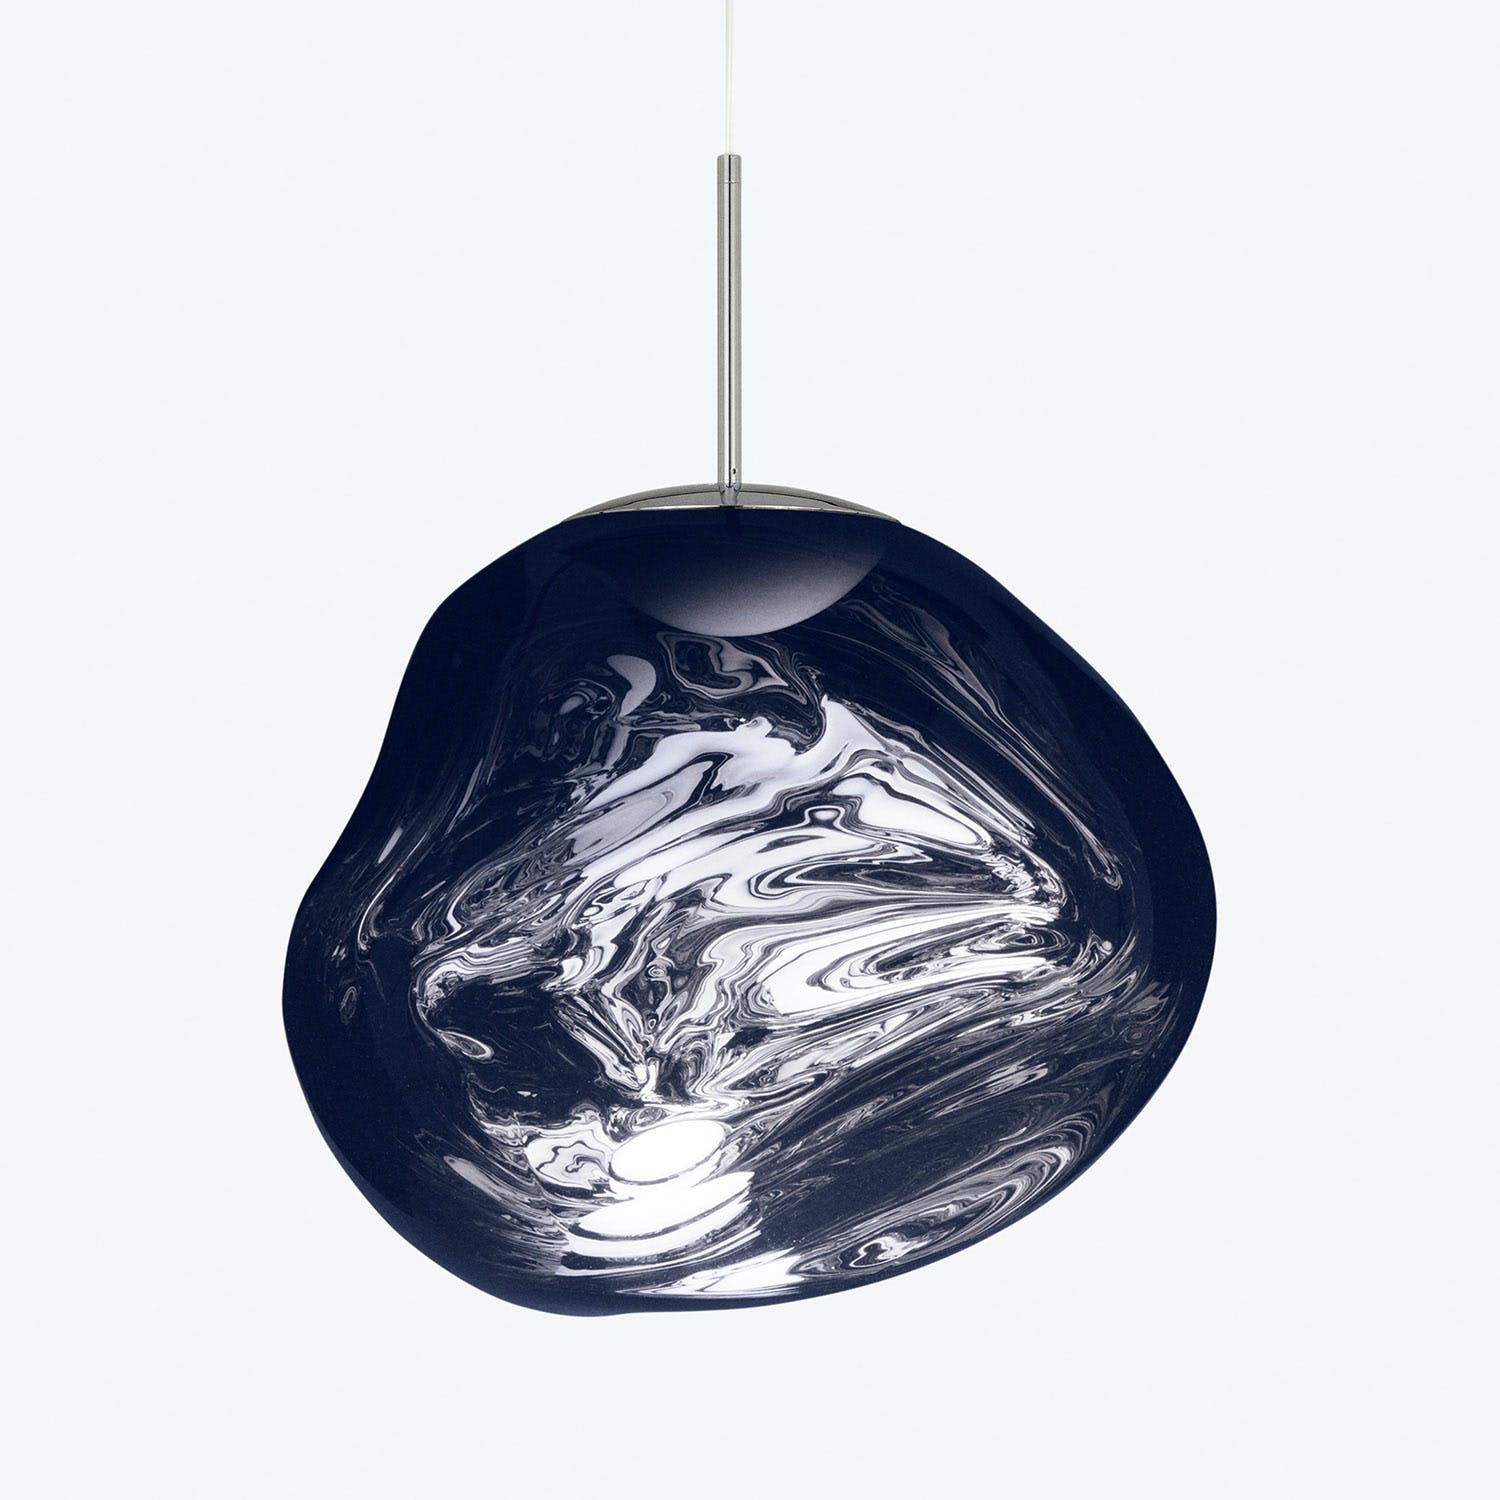 Modern pendant light with organic shape and marble-like pattern.